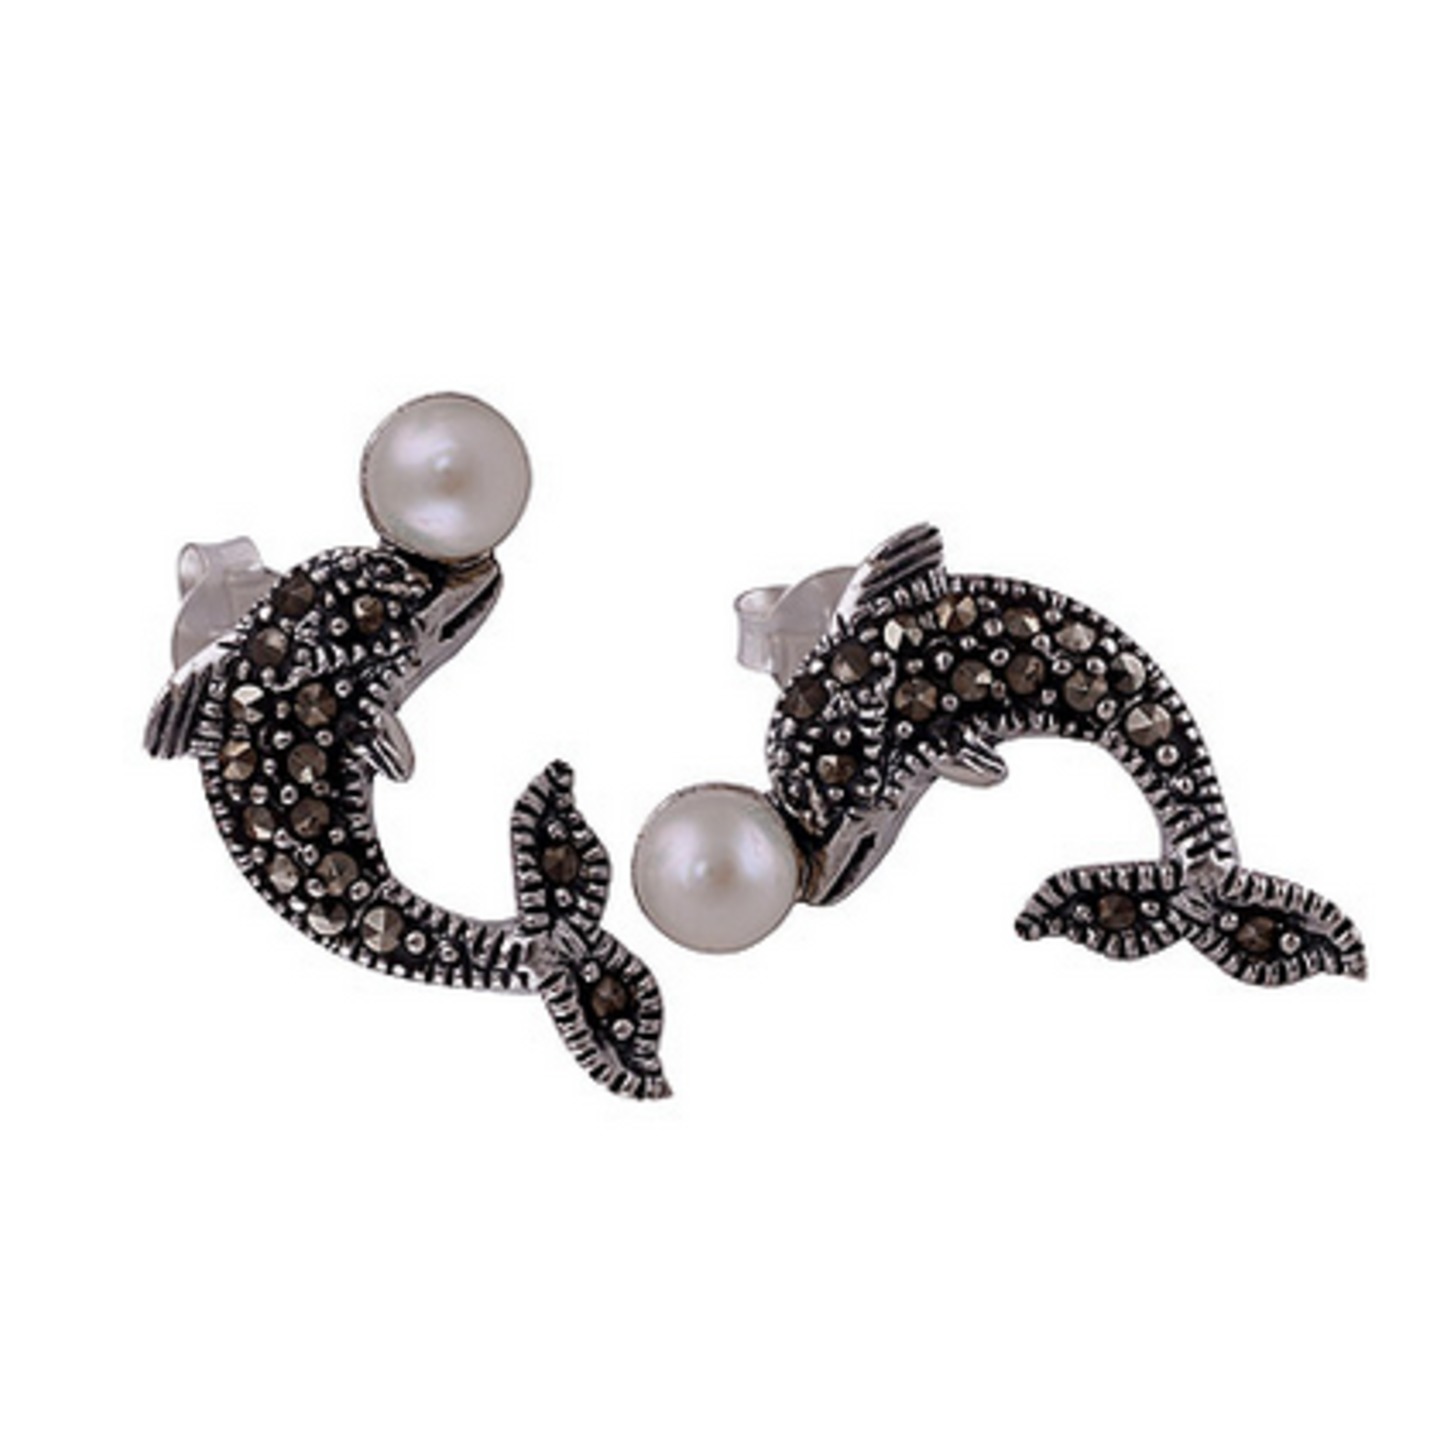 The Porpoise Marcasite & Pearl Cut Stone Studs